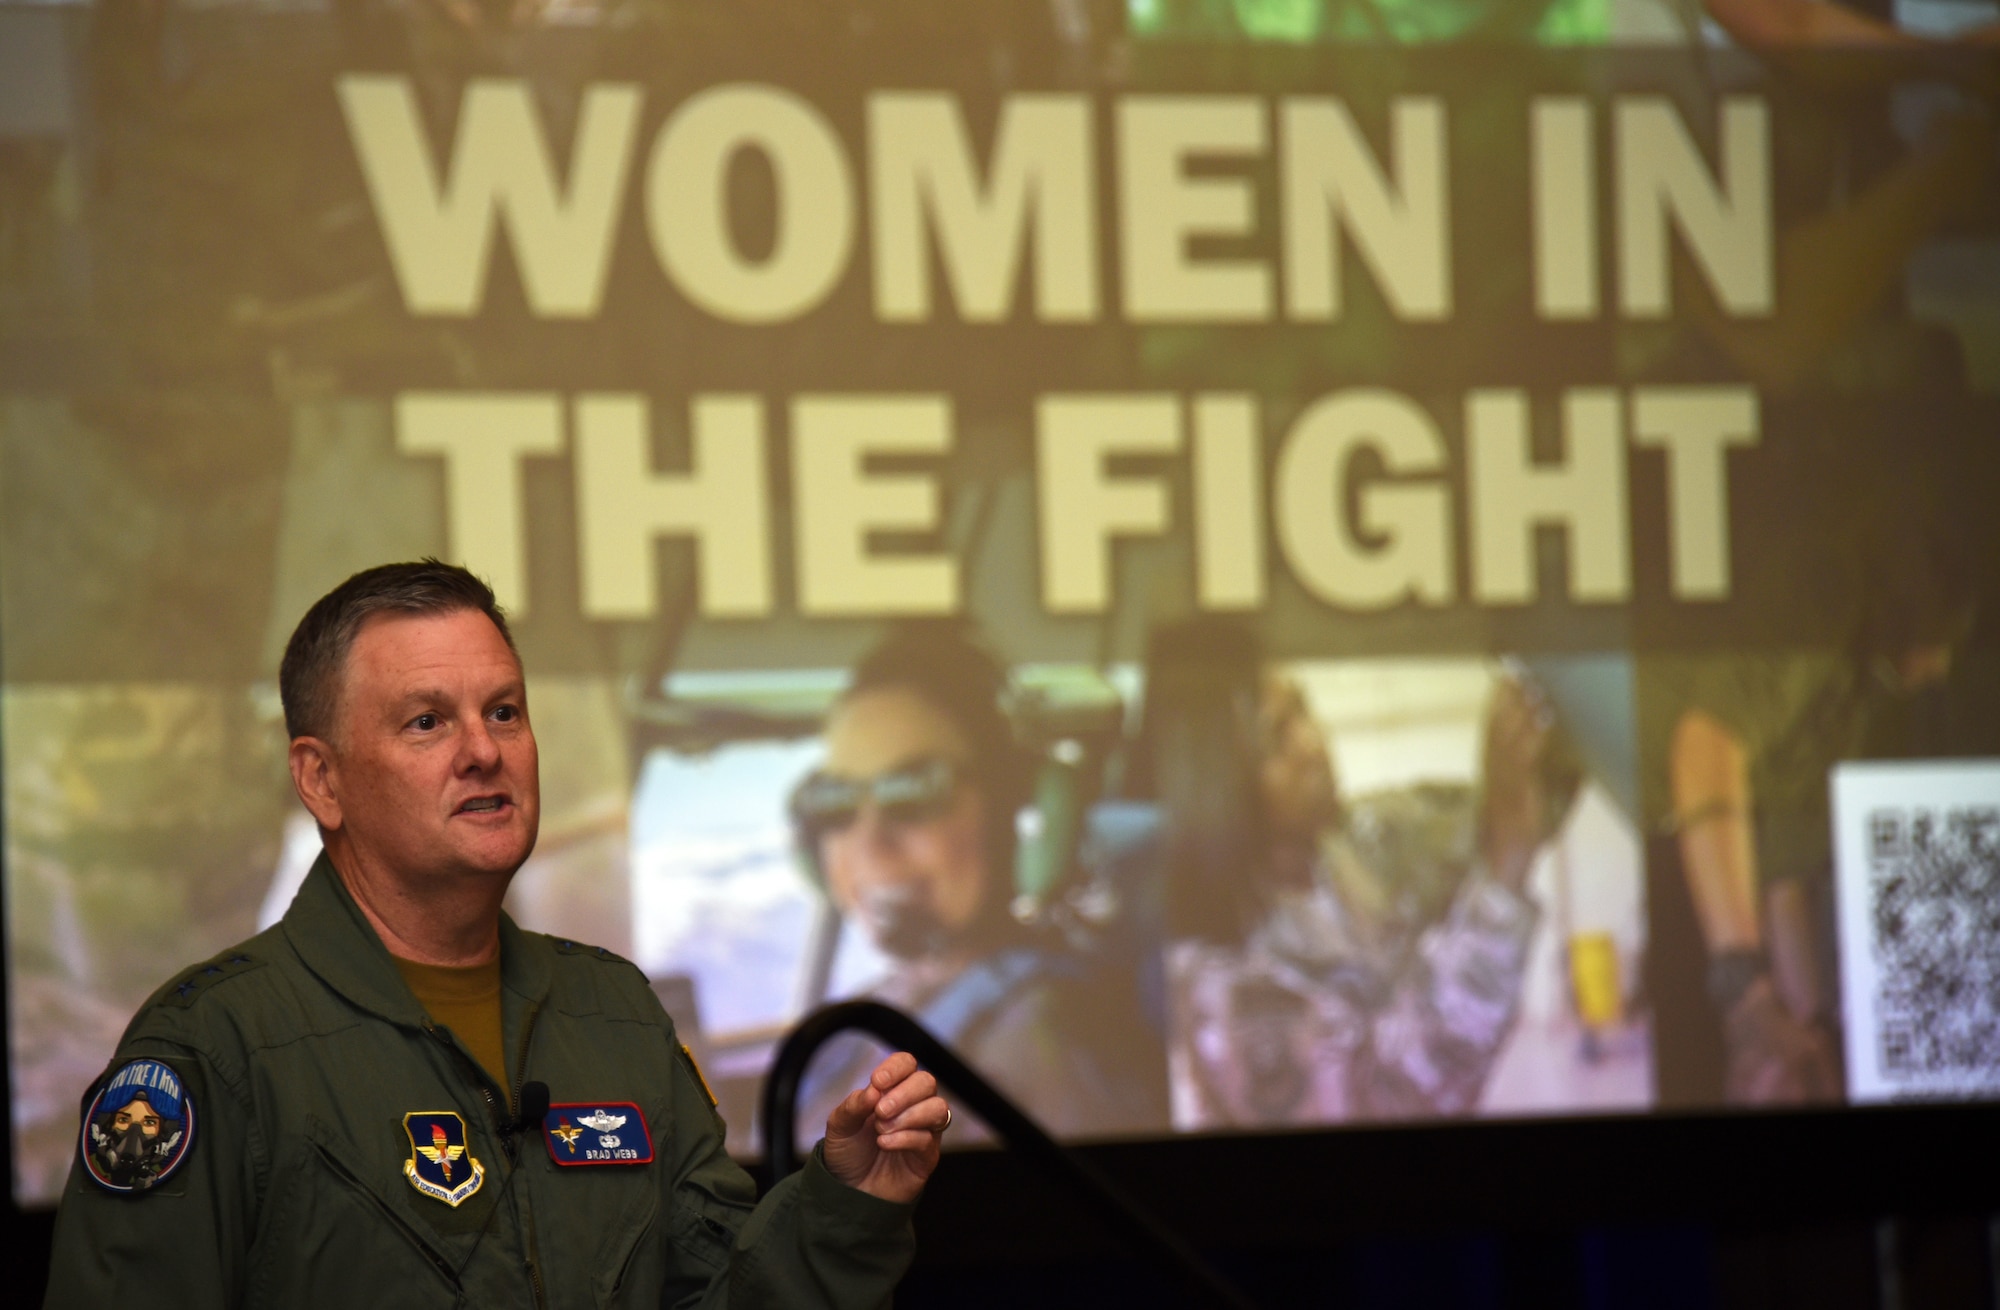 Lt. Gen. Brad Webb, commander of Air Education and Training Command gave opening remarks